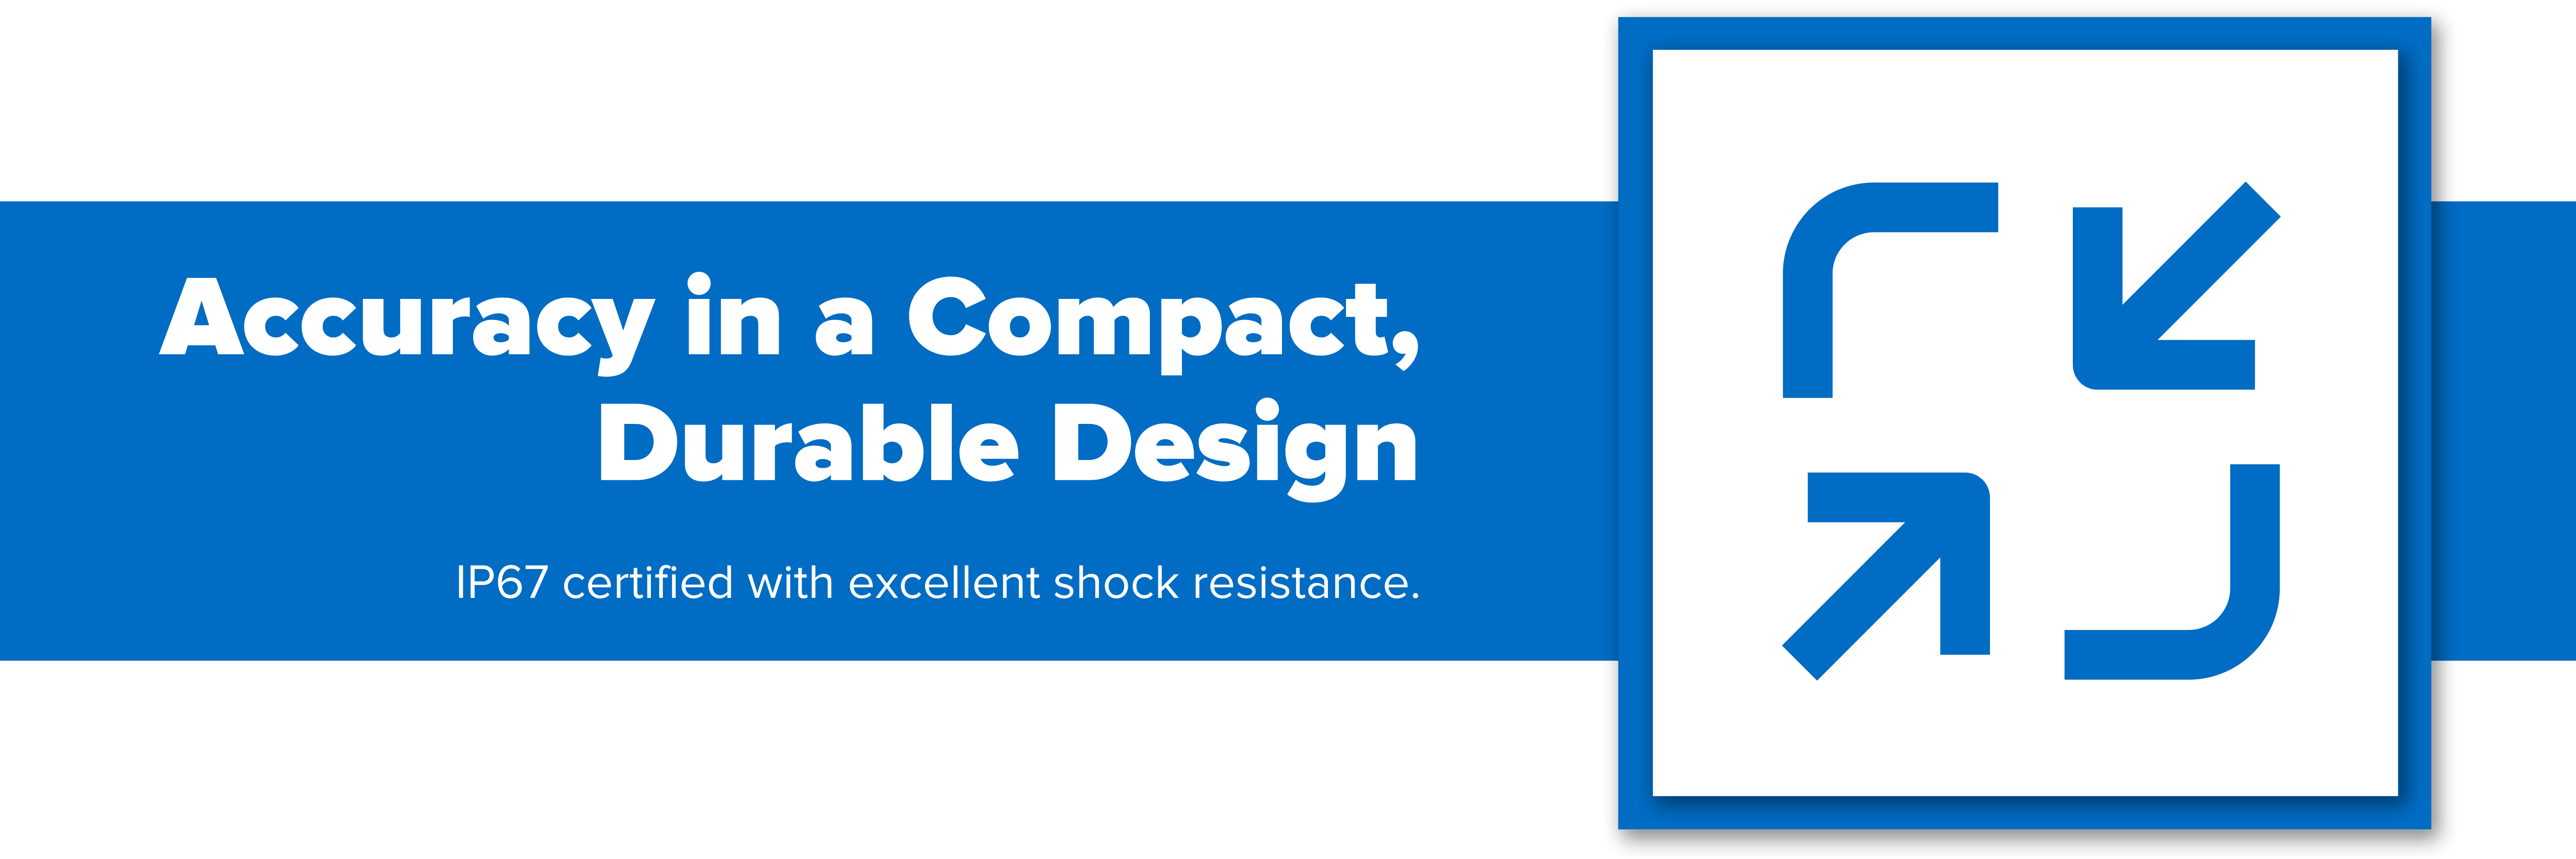 Header image with text "Accuracy in a Compact, Durable Design"